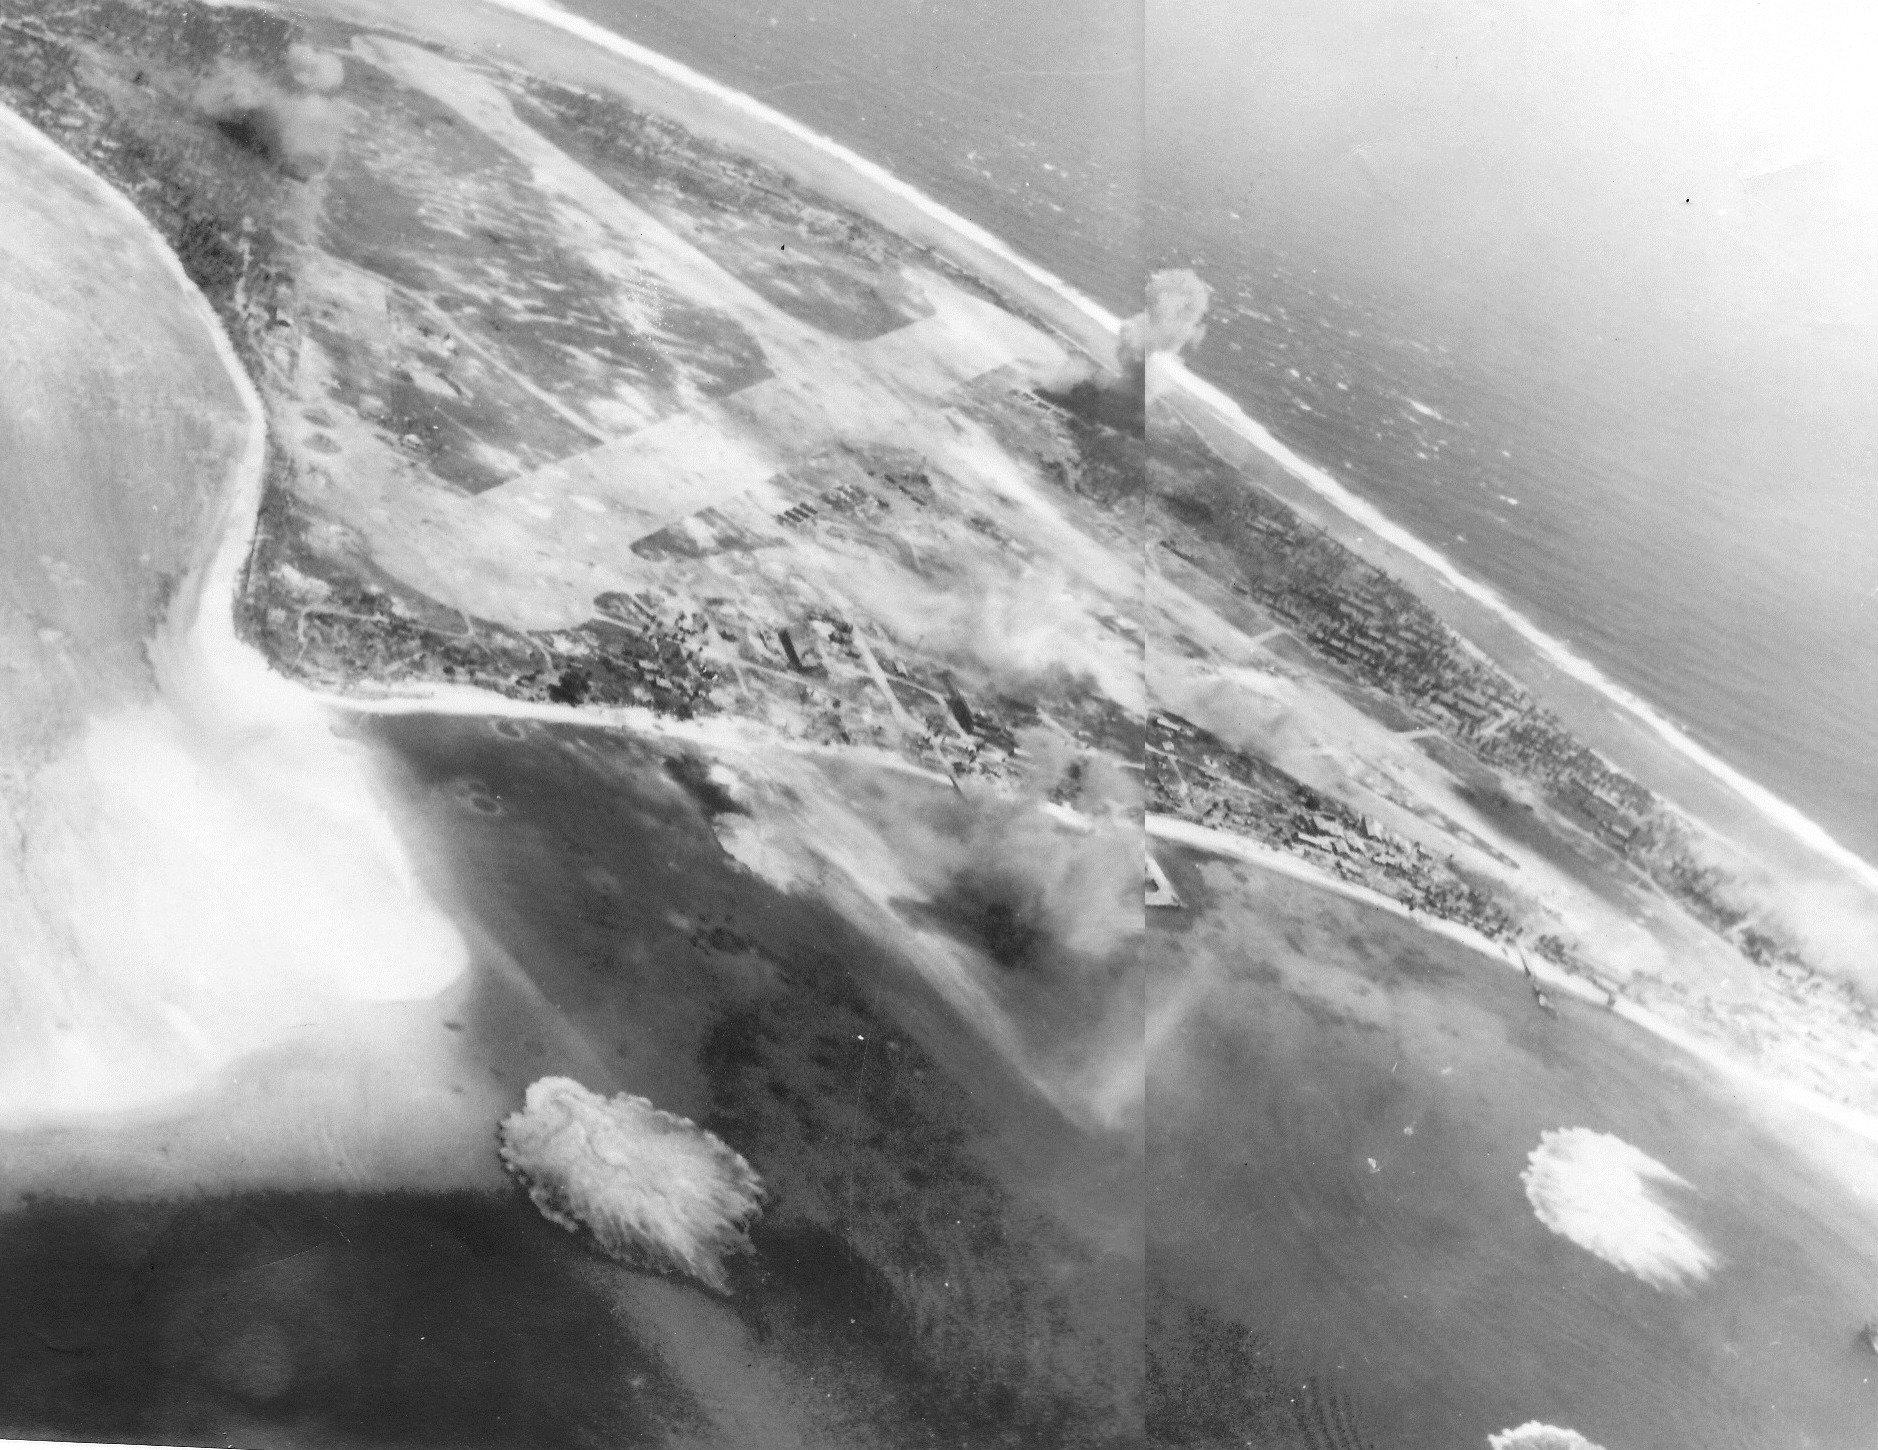 Strike photo stitched together from photos taken by USS Langley aircraft showing severe damage to the runways and the surrounding areas on Taroa Island, Maloelap Atoll, Marshall Islands, 30 Jan 1944.